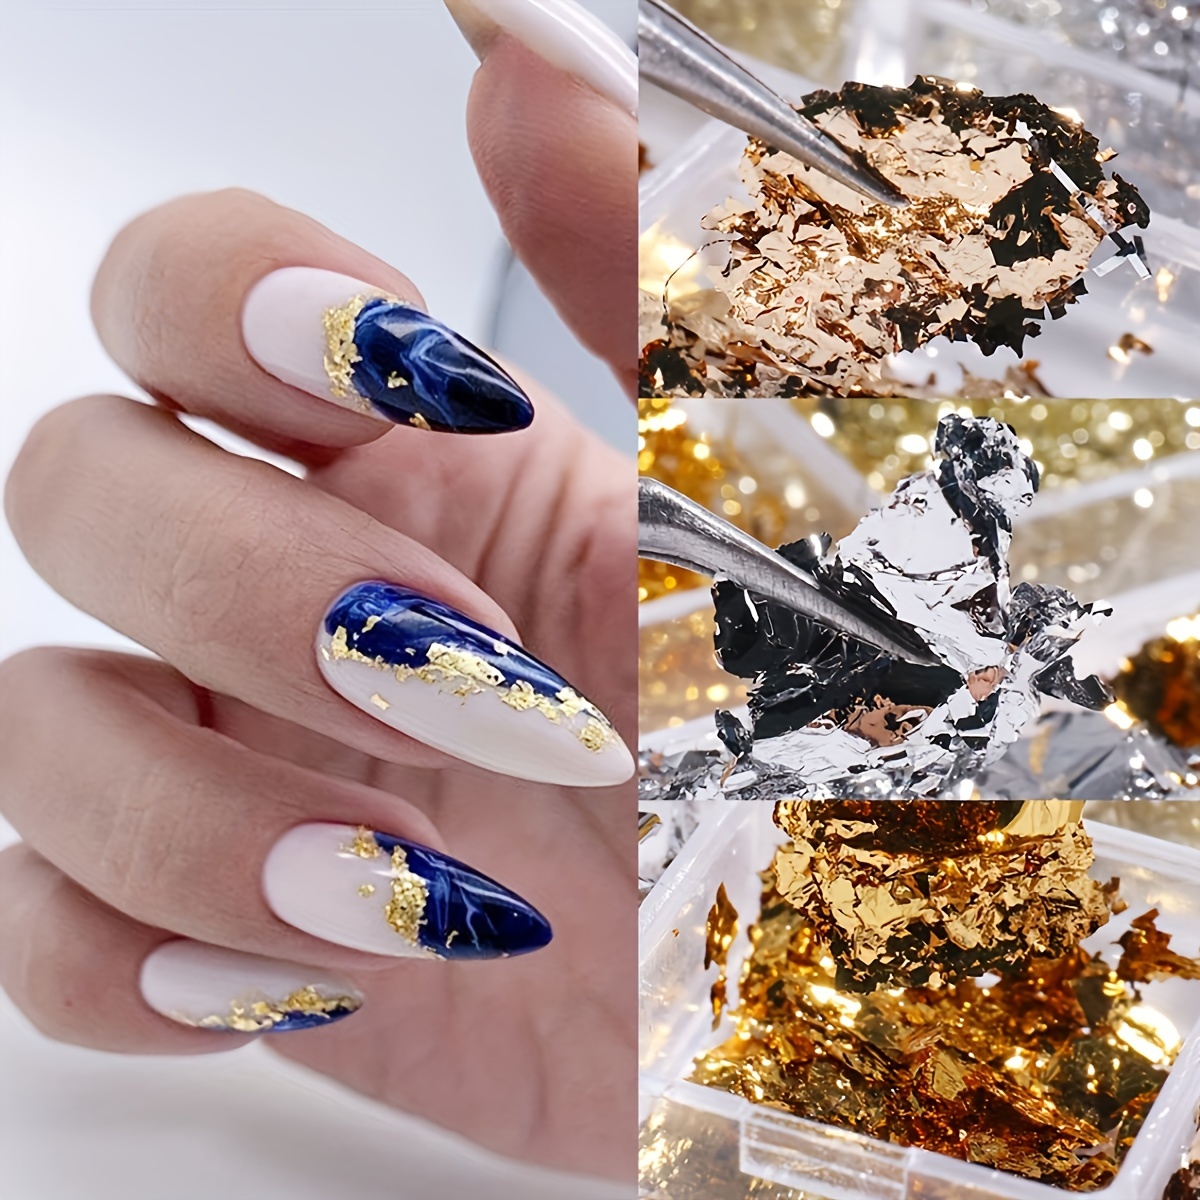 Nail Foil 3D Sparking Gold Flakes for Nails 6 Grids Metallic Nail  Gold&Silver